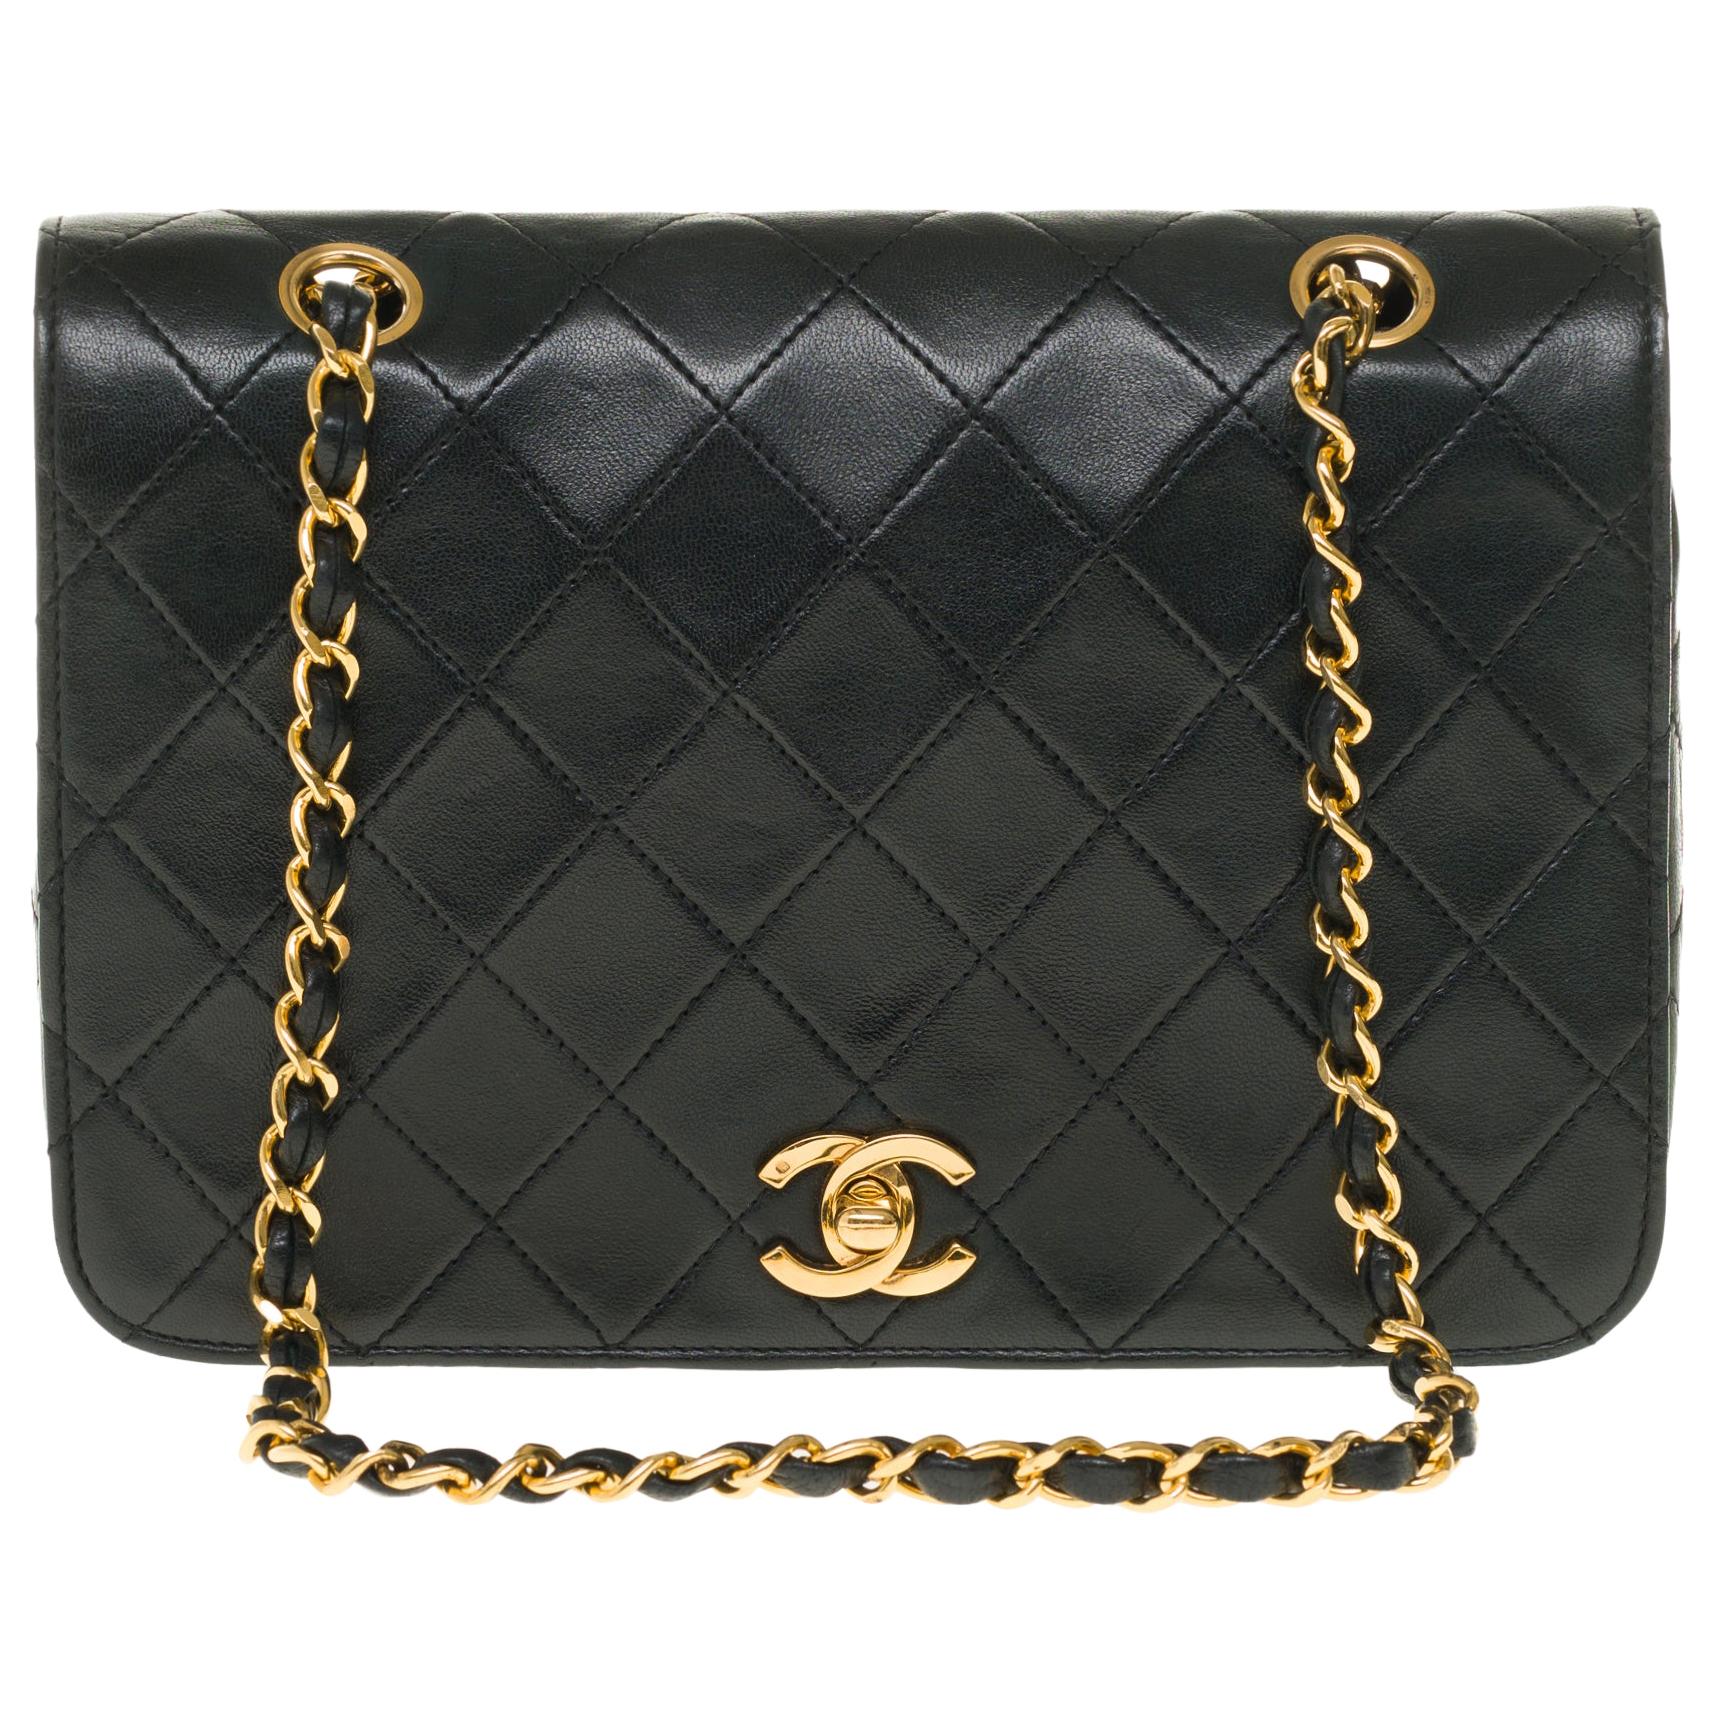 Stunning Chanel Classic Shoulder bag in black quilted lambskin and gold hardware